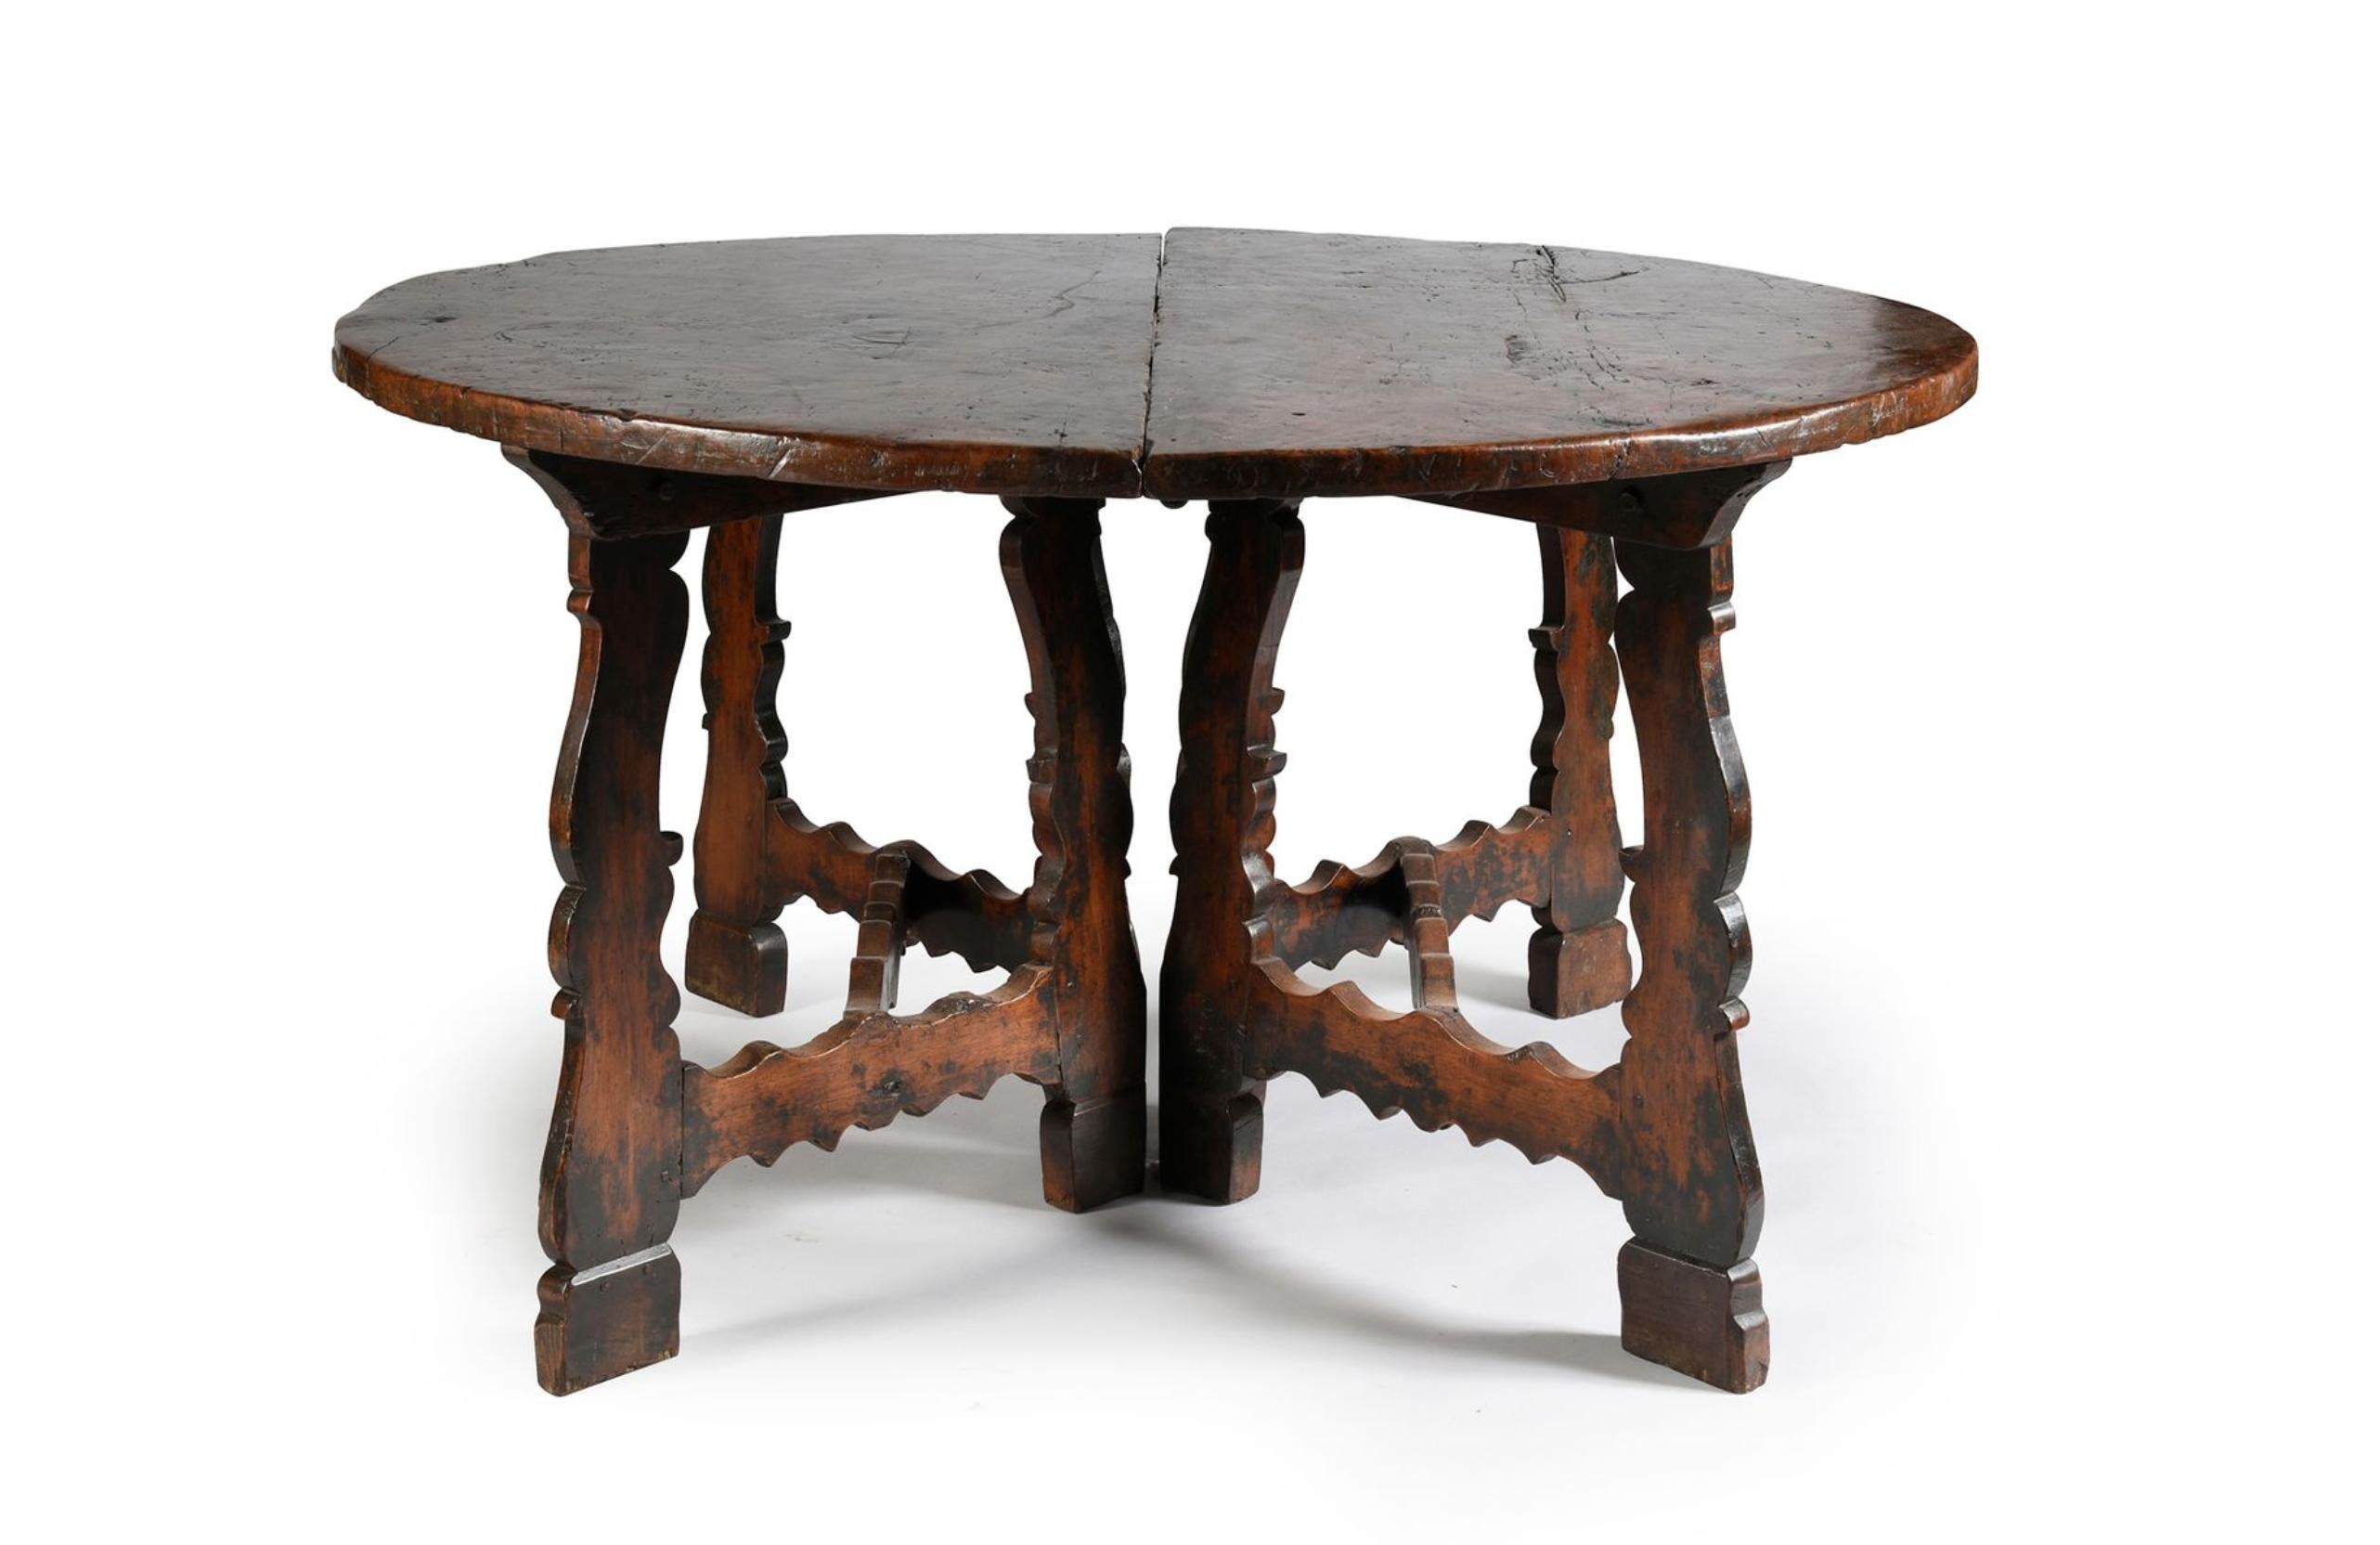 Italian 18th Century Paris of Consoles Forming a Center Table